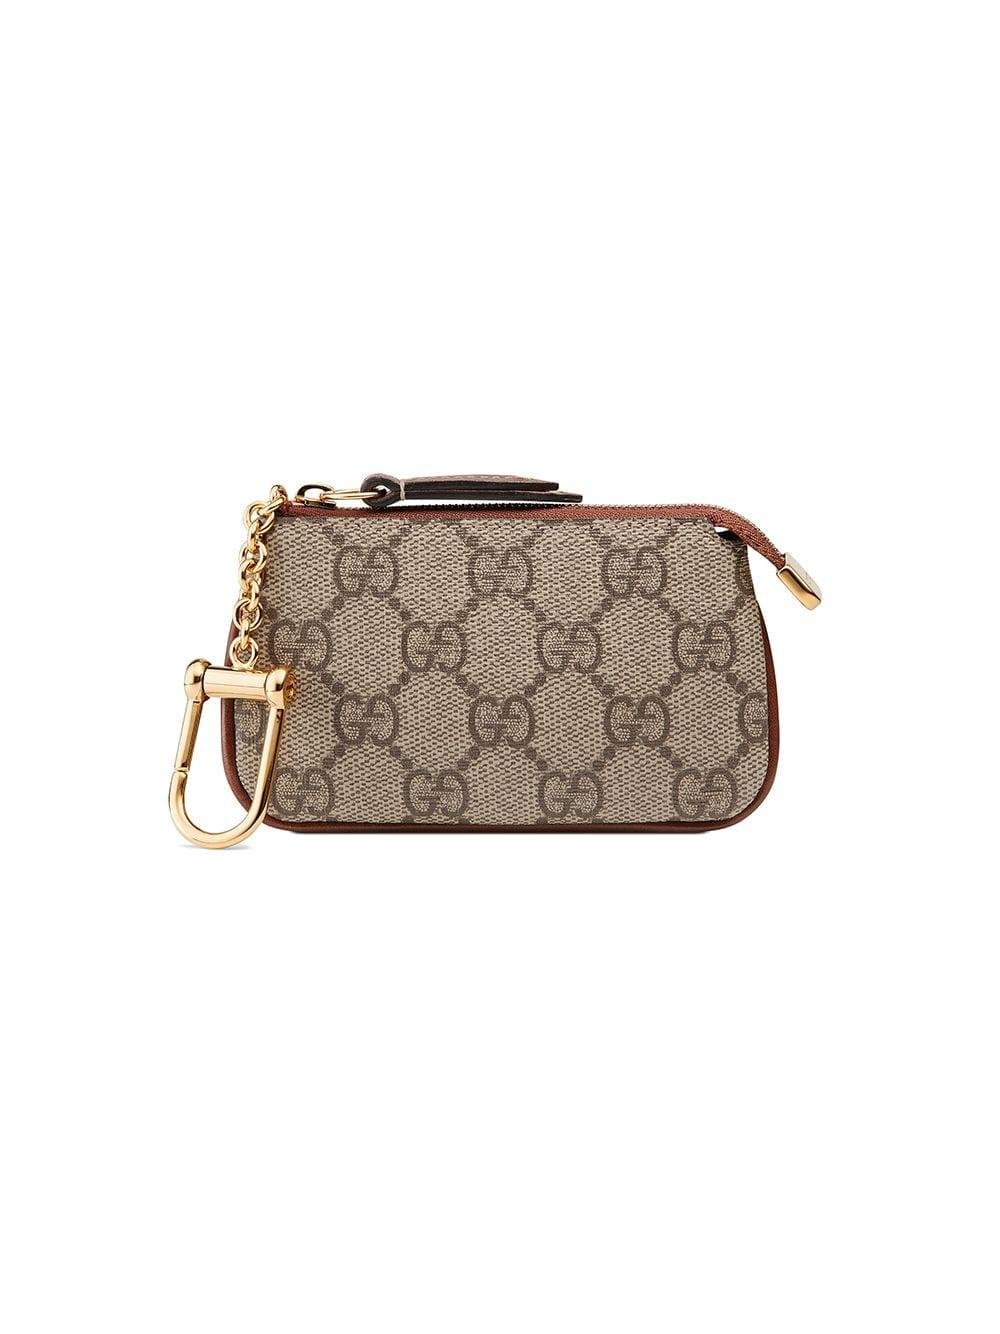 Gucci GG Supreme Key Pouch in Natural | Lyst